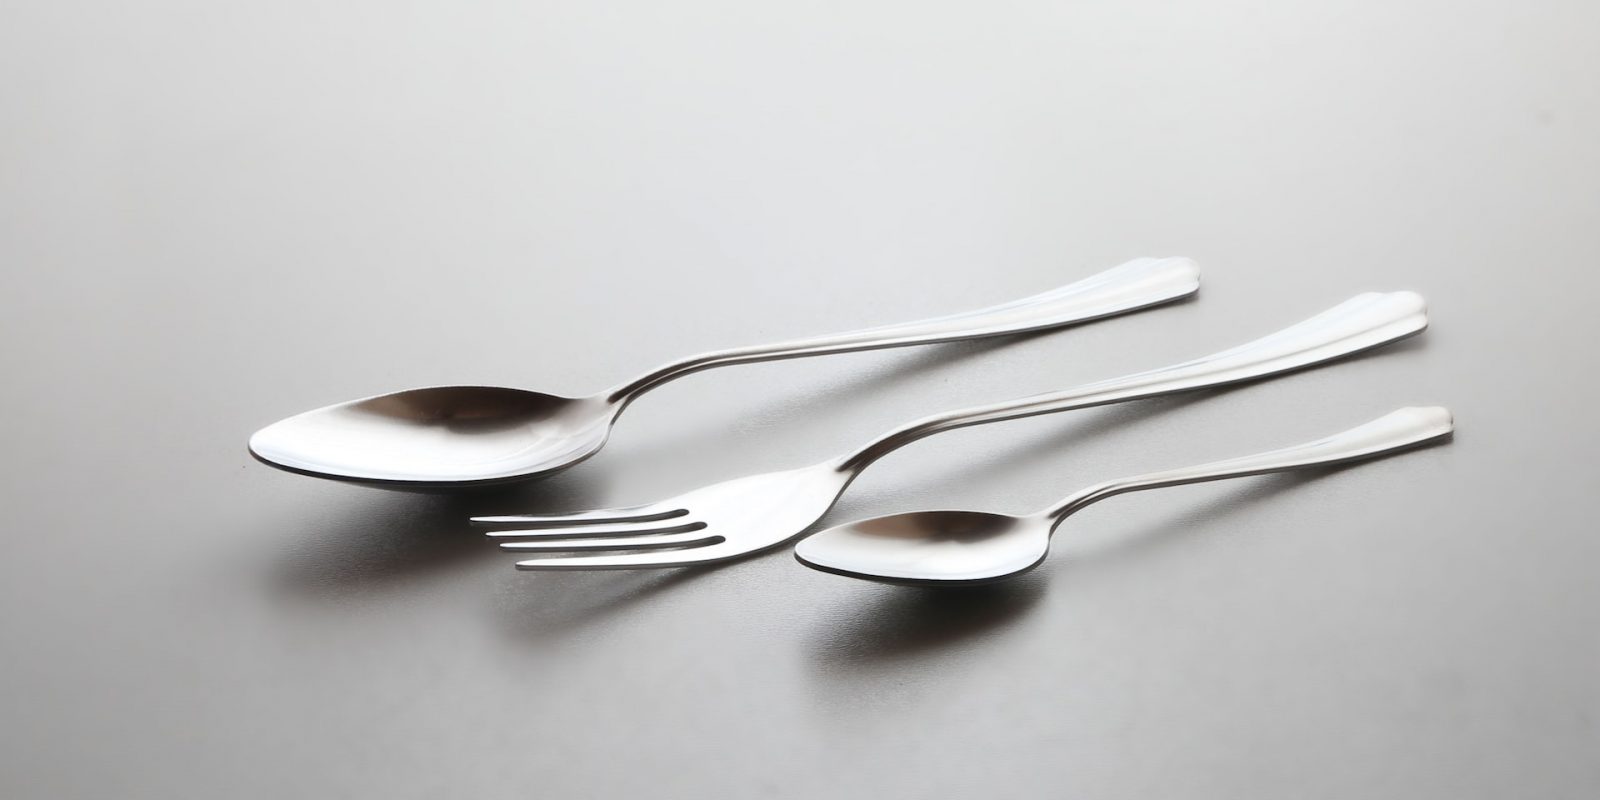 How to Choose the Best Travel Cutlery Set